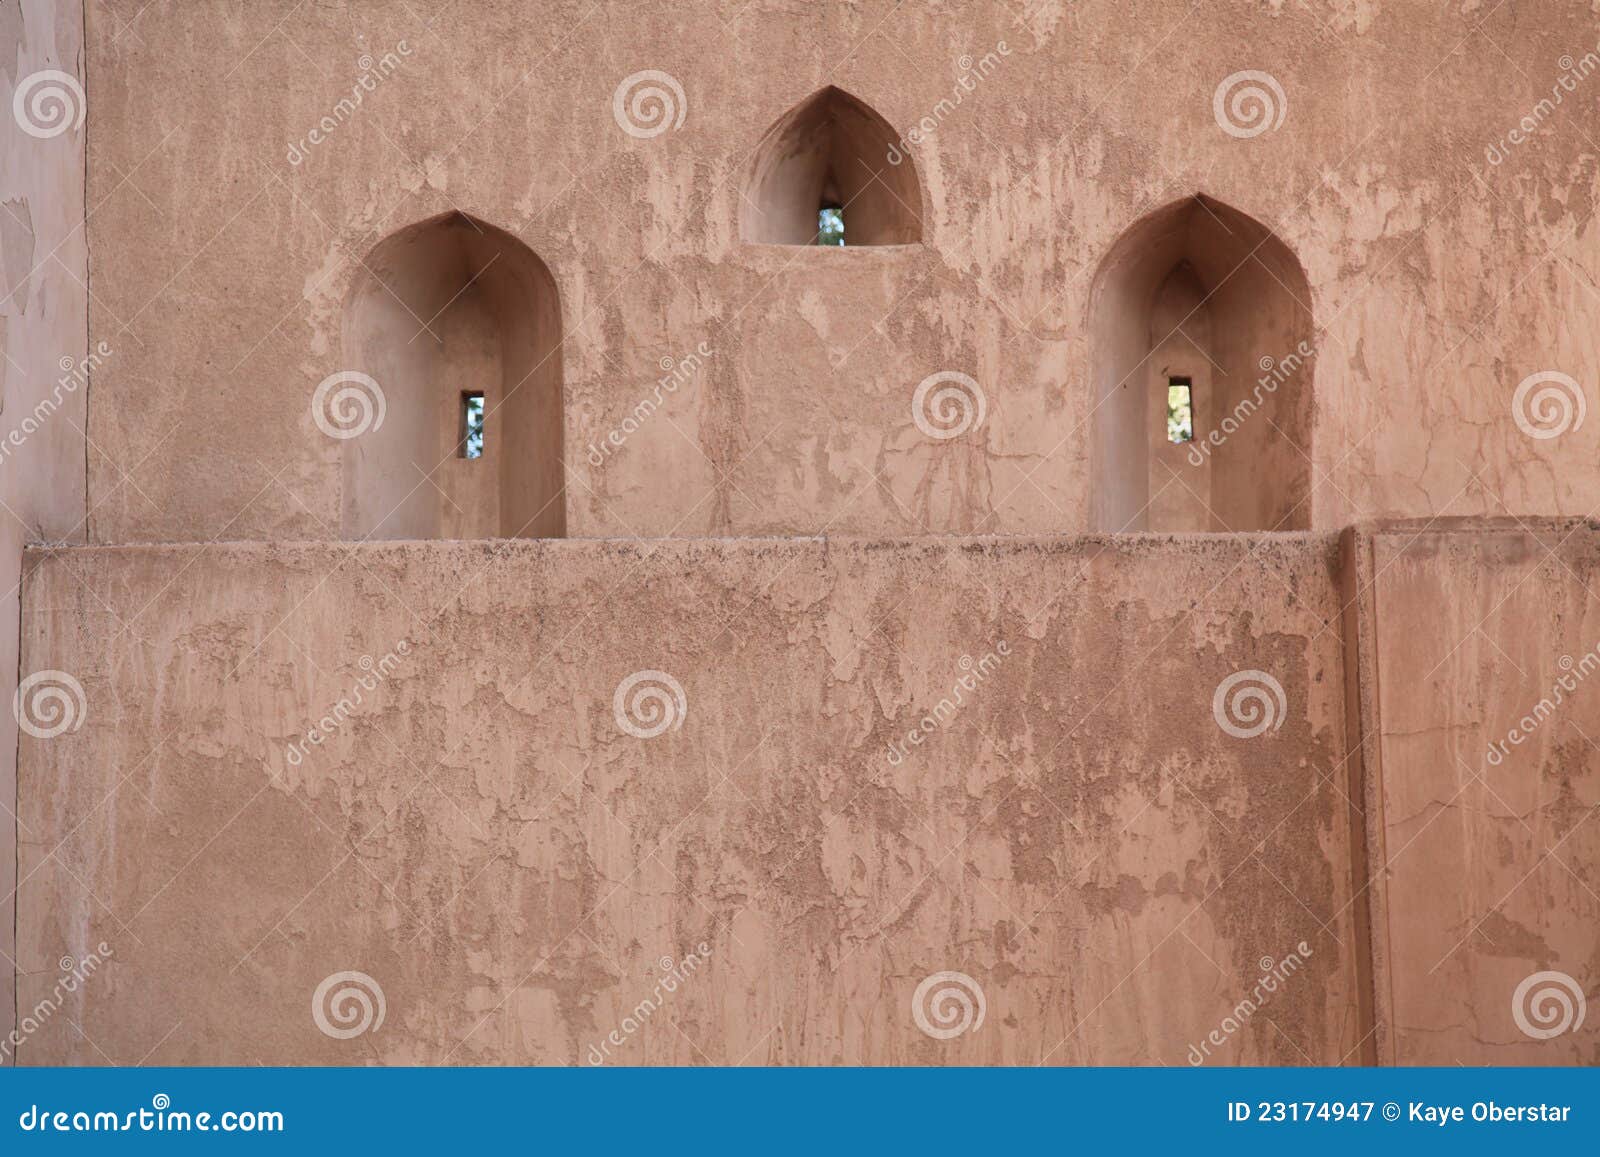 lookouts at jabreen castle